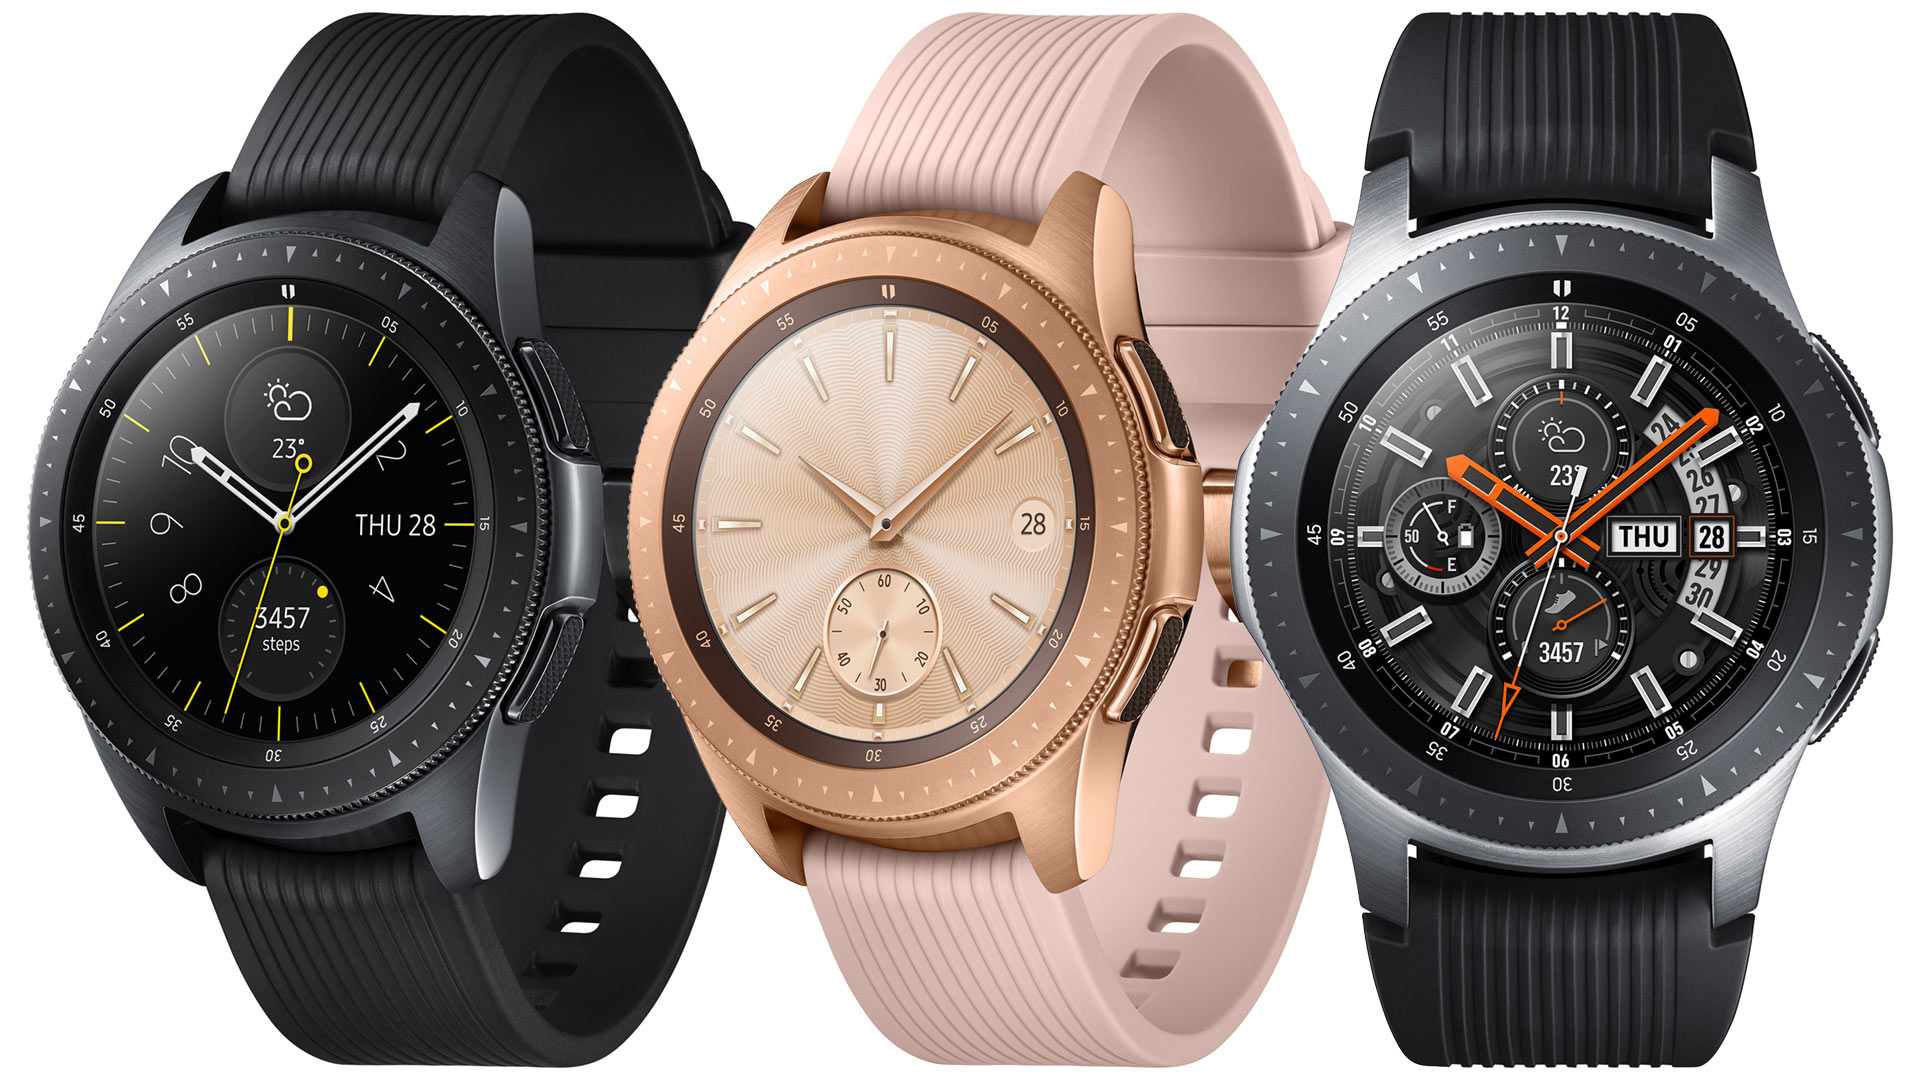 Samsung Galaxy Smartwatch For 2018 Focuses On Enhancing Battery aBlogtoWatch